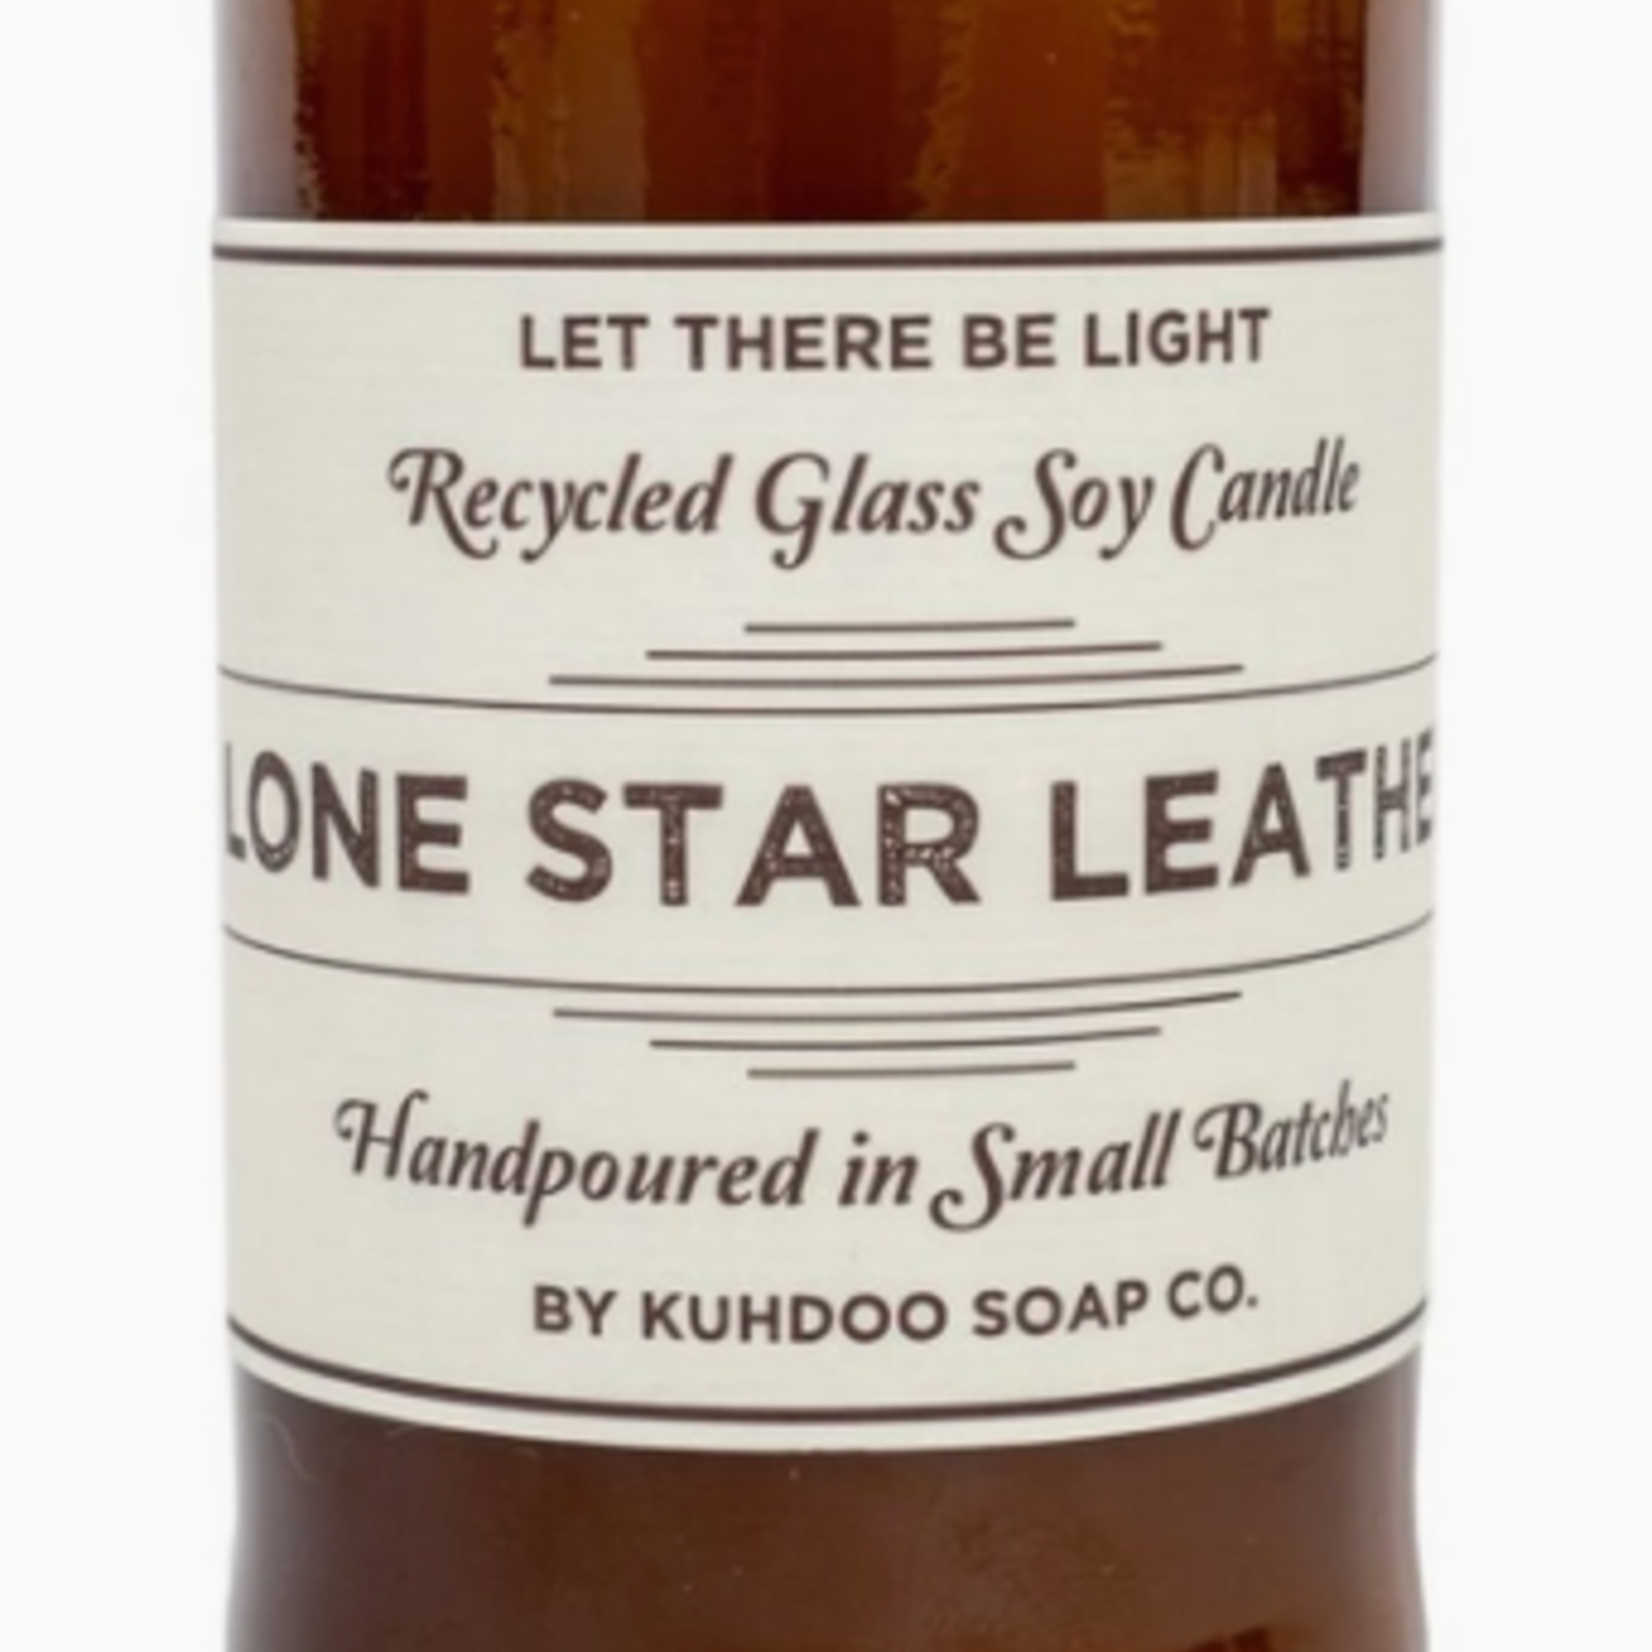 Kuhdoo Soap Lone Star Leather Candle 6.5oz